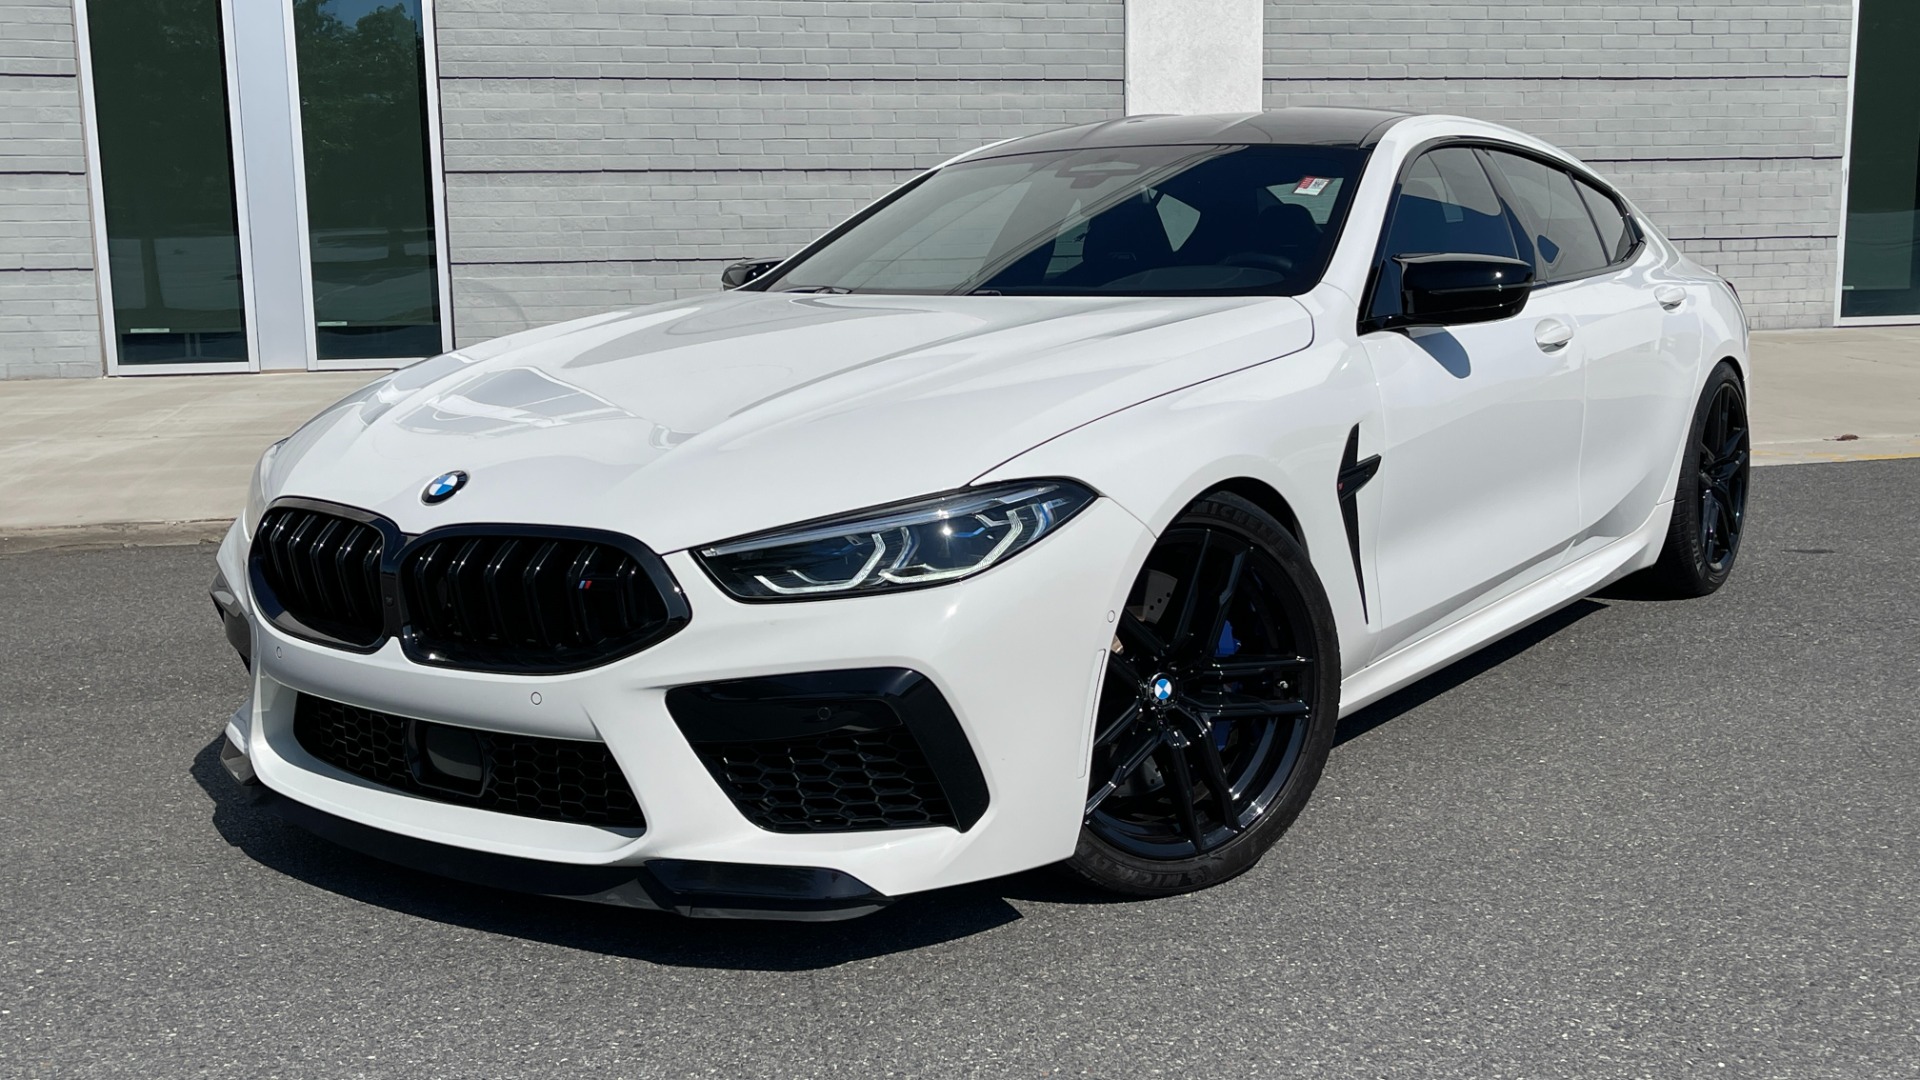 Used 2020 BMW M8 COMPETITON / TWIN TURBO / KW V3 SUSPENSION / FRONT LIFT / PPF / CERAMIC COA for sale $114,999 at Formula Imports in Charlotte NC 28227 38